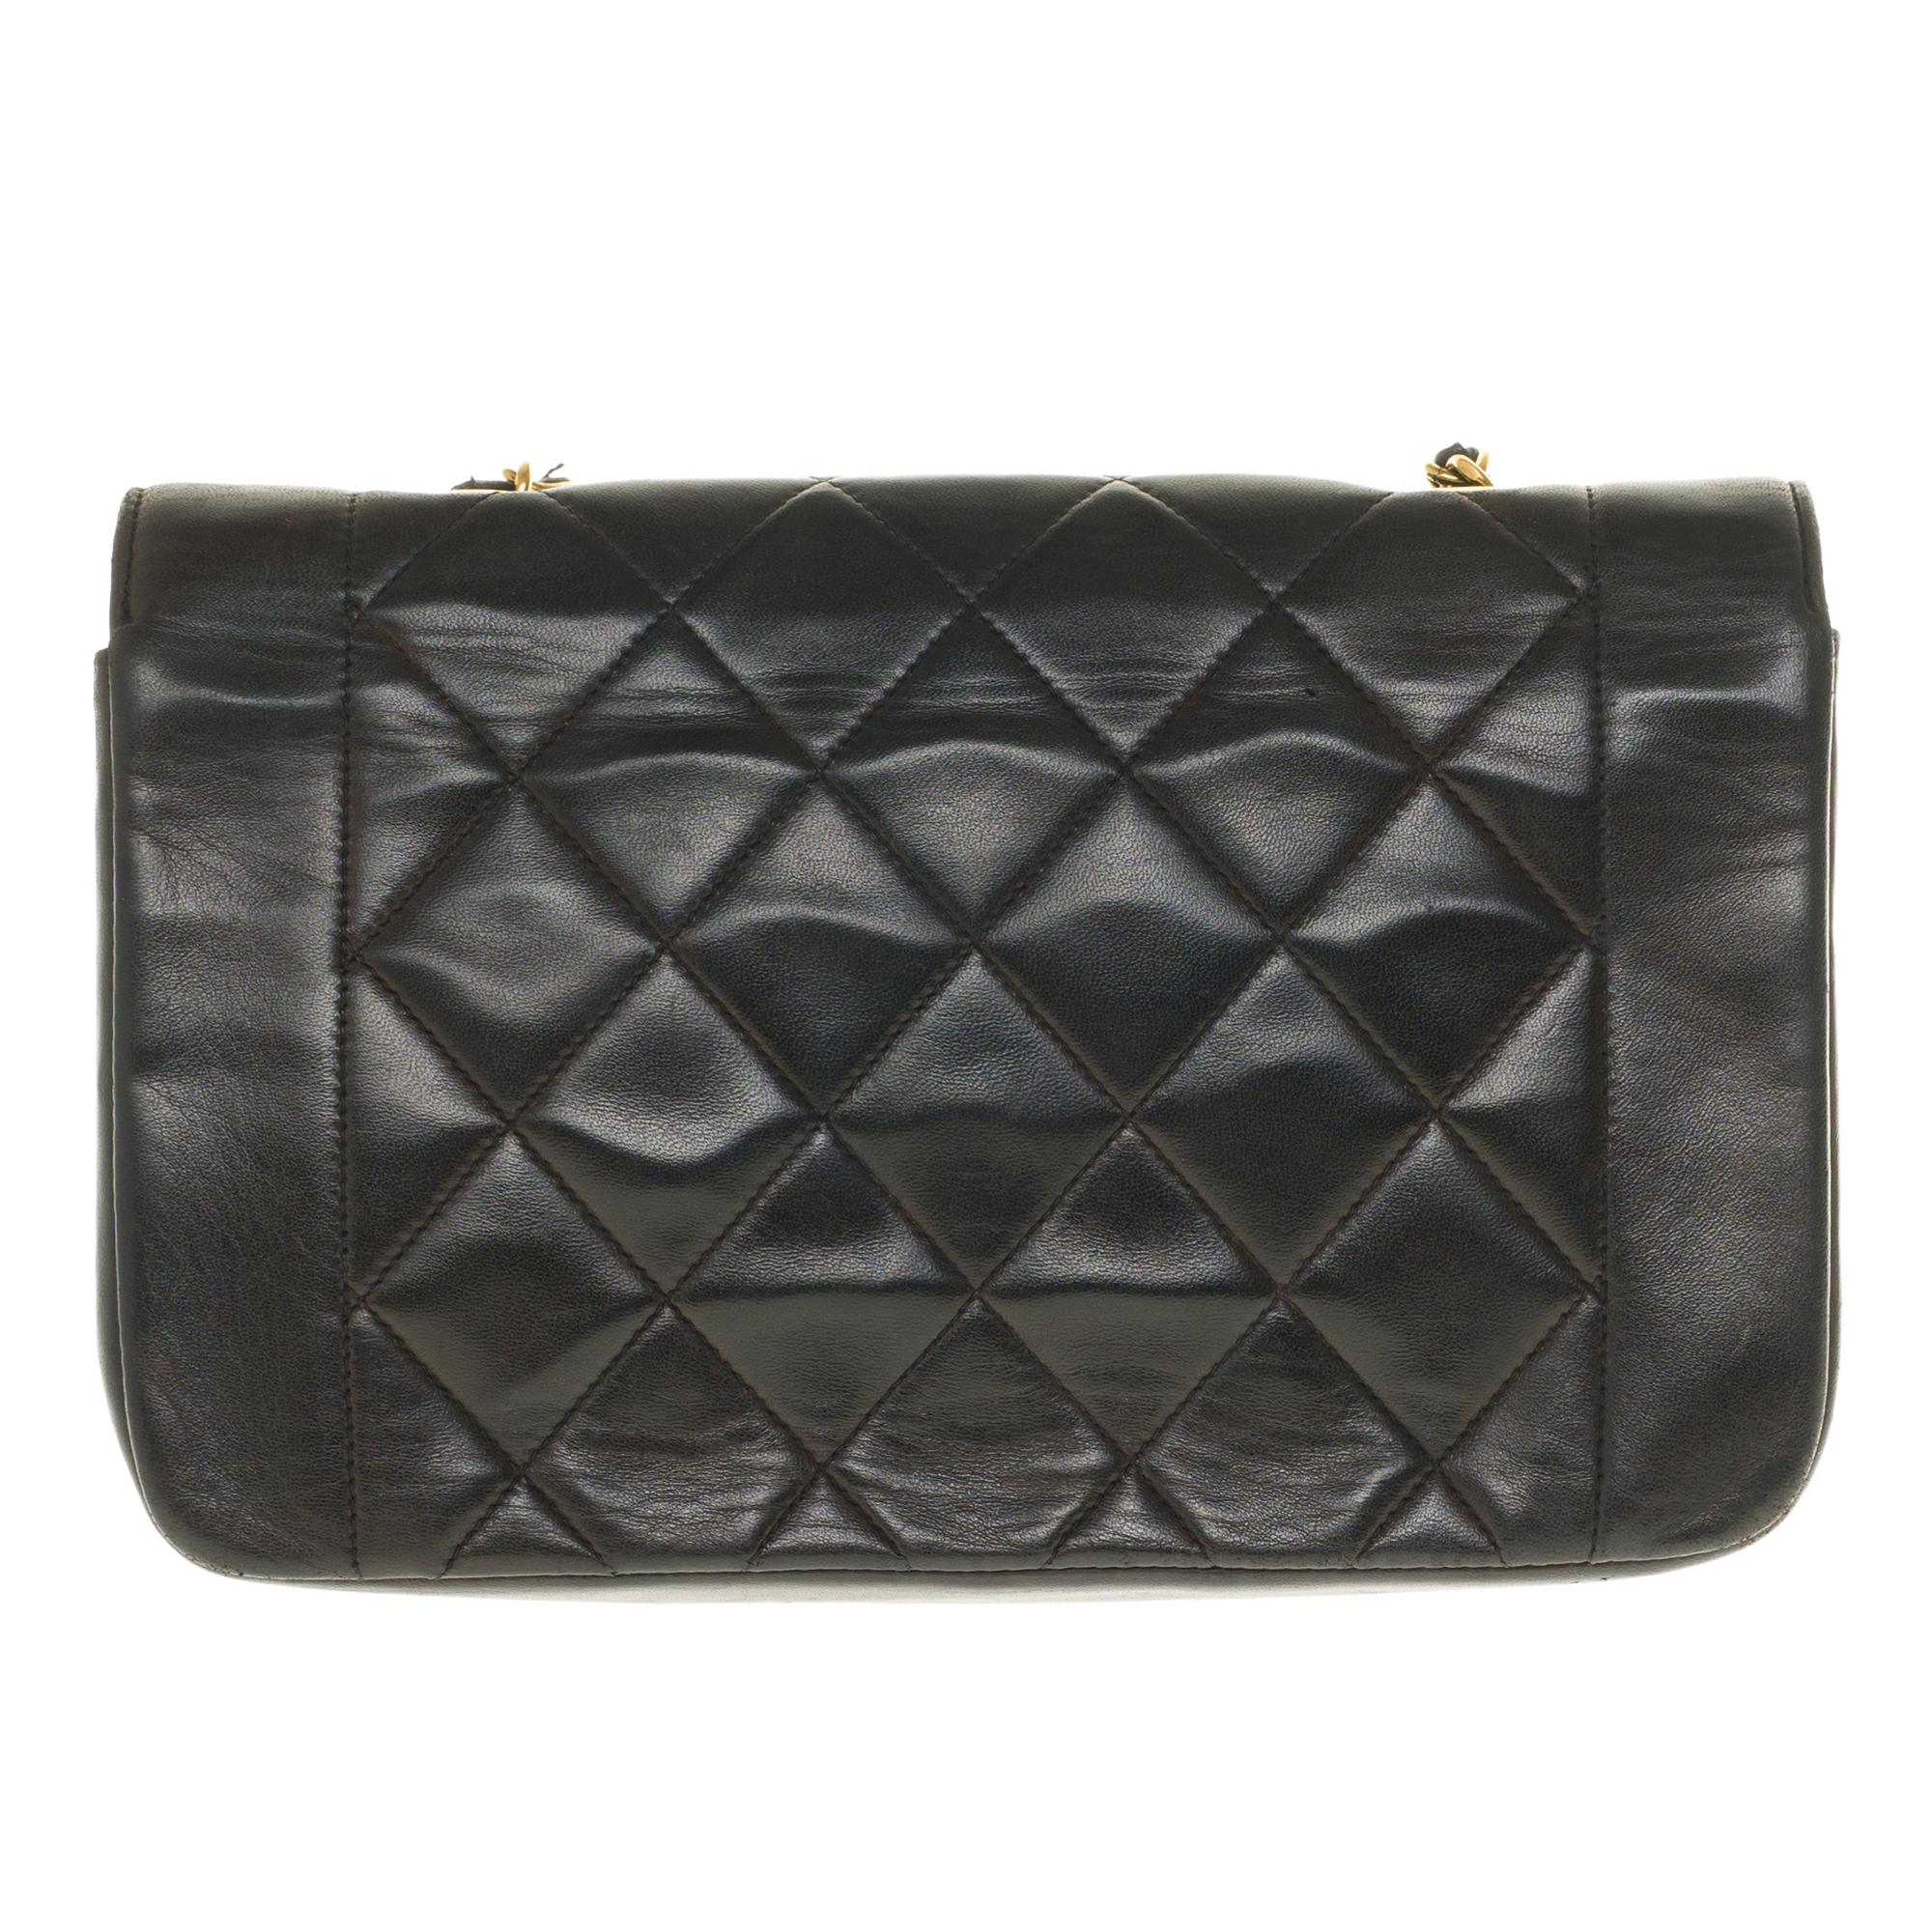 Very Classy Chanel Diana shoulder bag in black quilted leather, gold-tone metal hardware, a gold-tone metal chain handle intertwined with black leather for a shoulder or shoulder strap.

Gilded metal logo closure on flap.
Lining in black leather, a